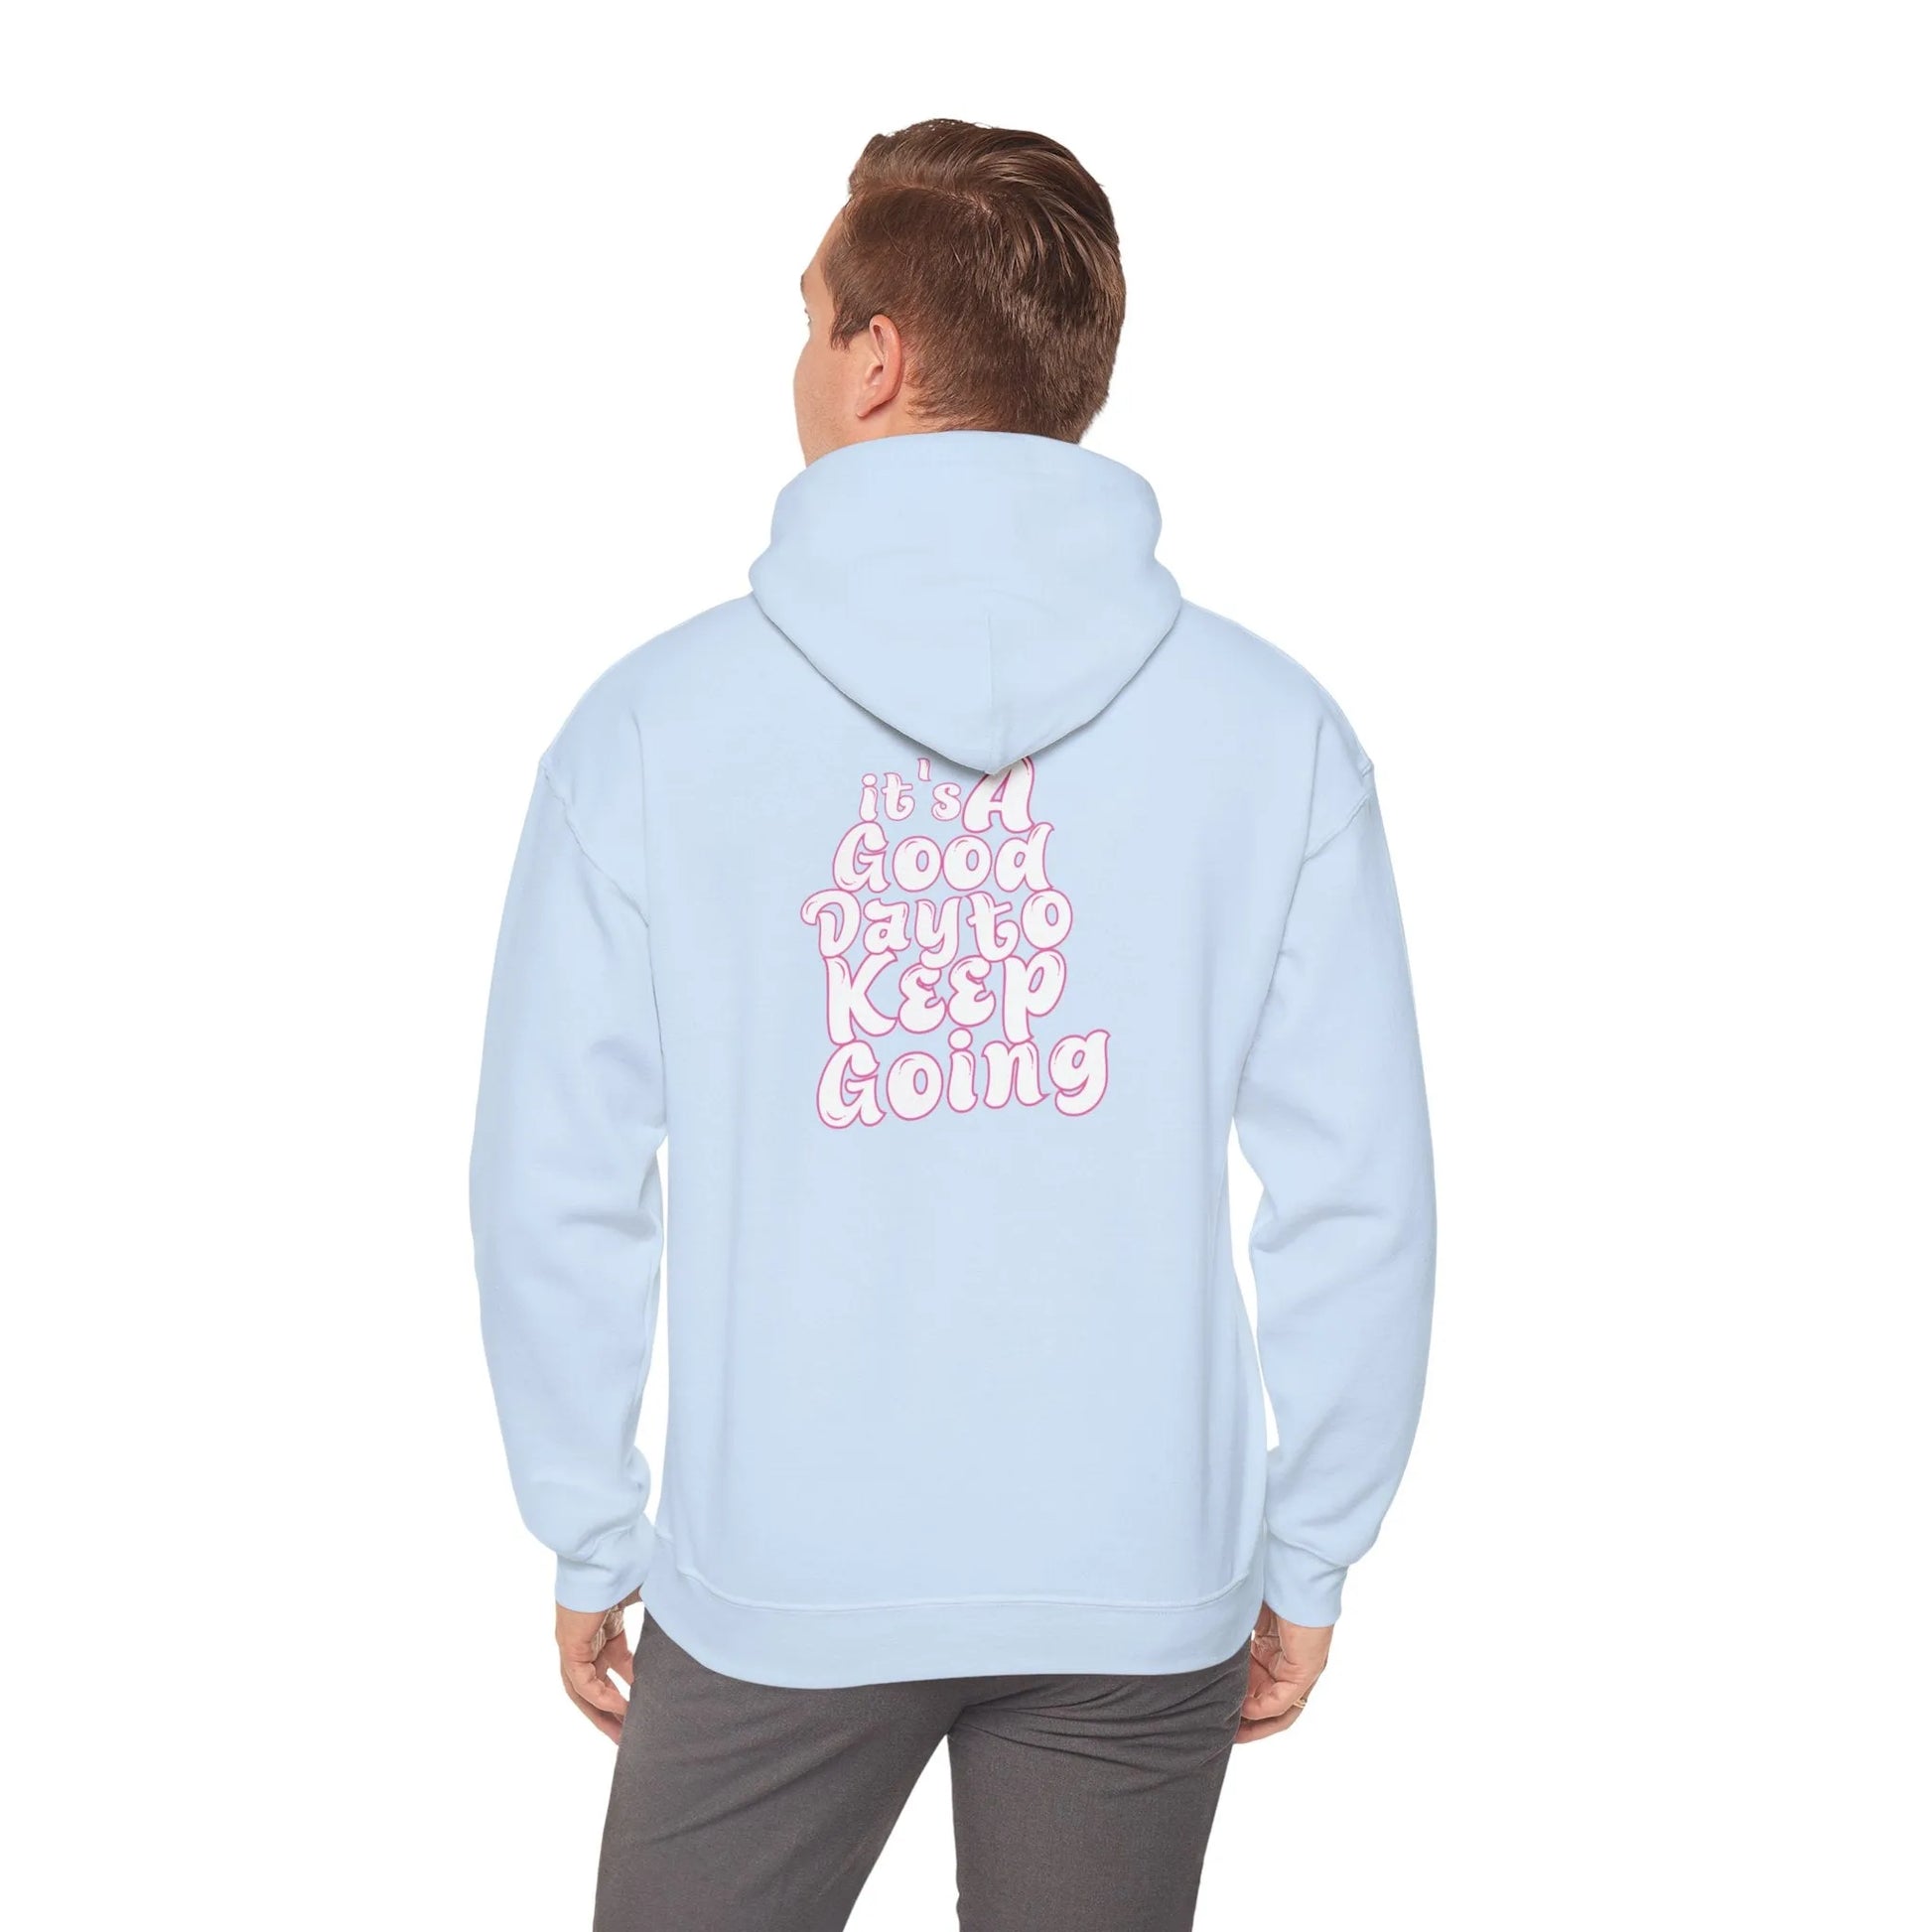 It's A Good Day To Keep Going Hoodie Pink - It's A Good Day To Keep Going Hooded Sweatshirt - Inspirational Apparel